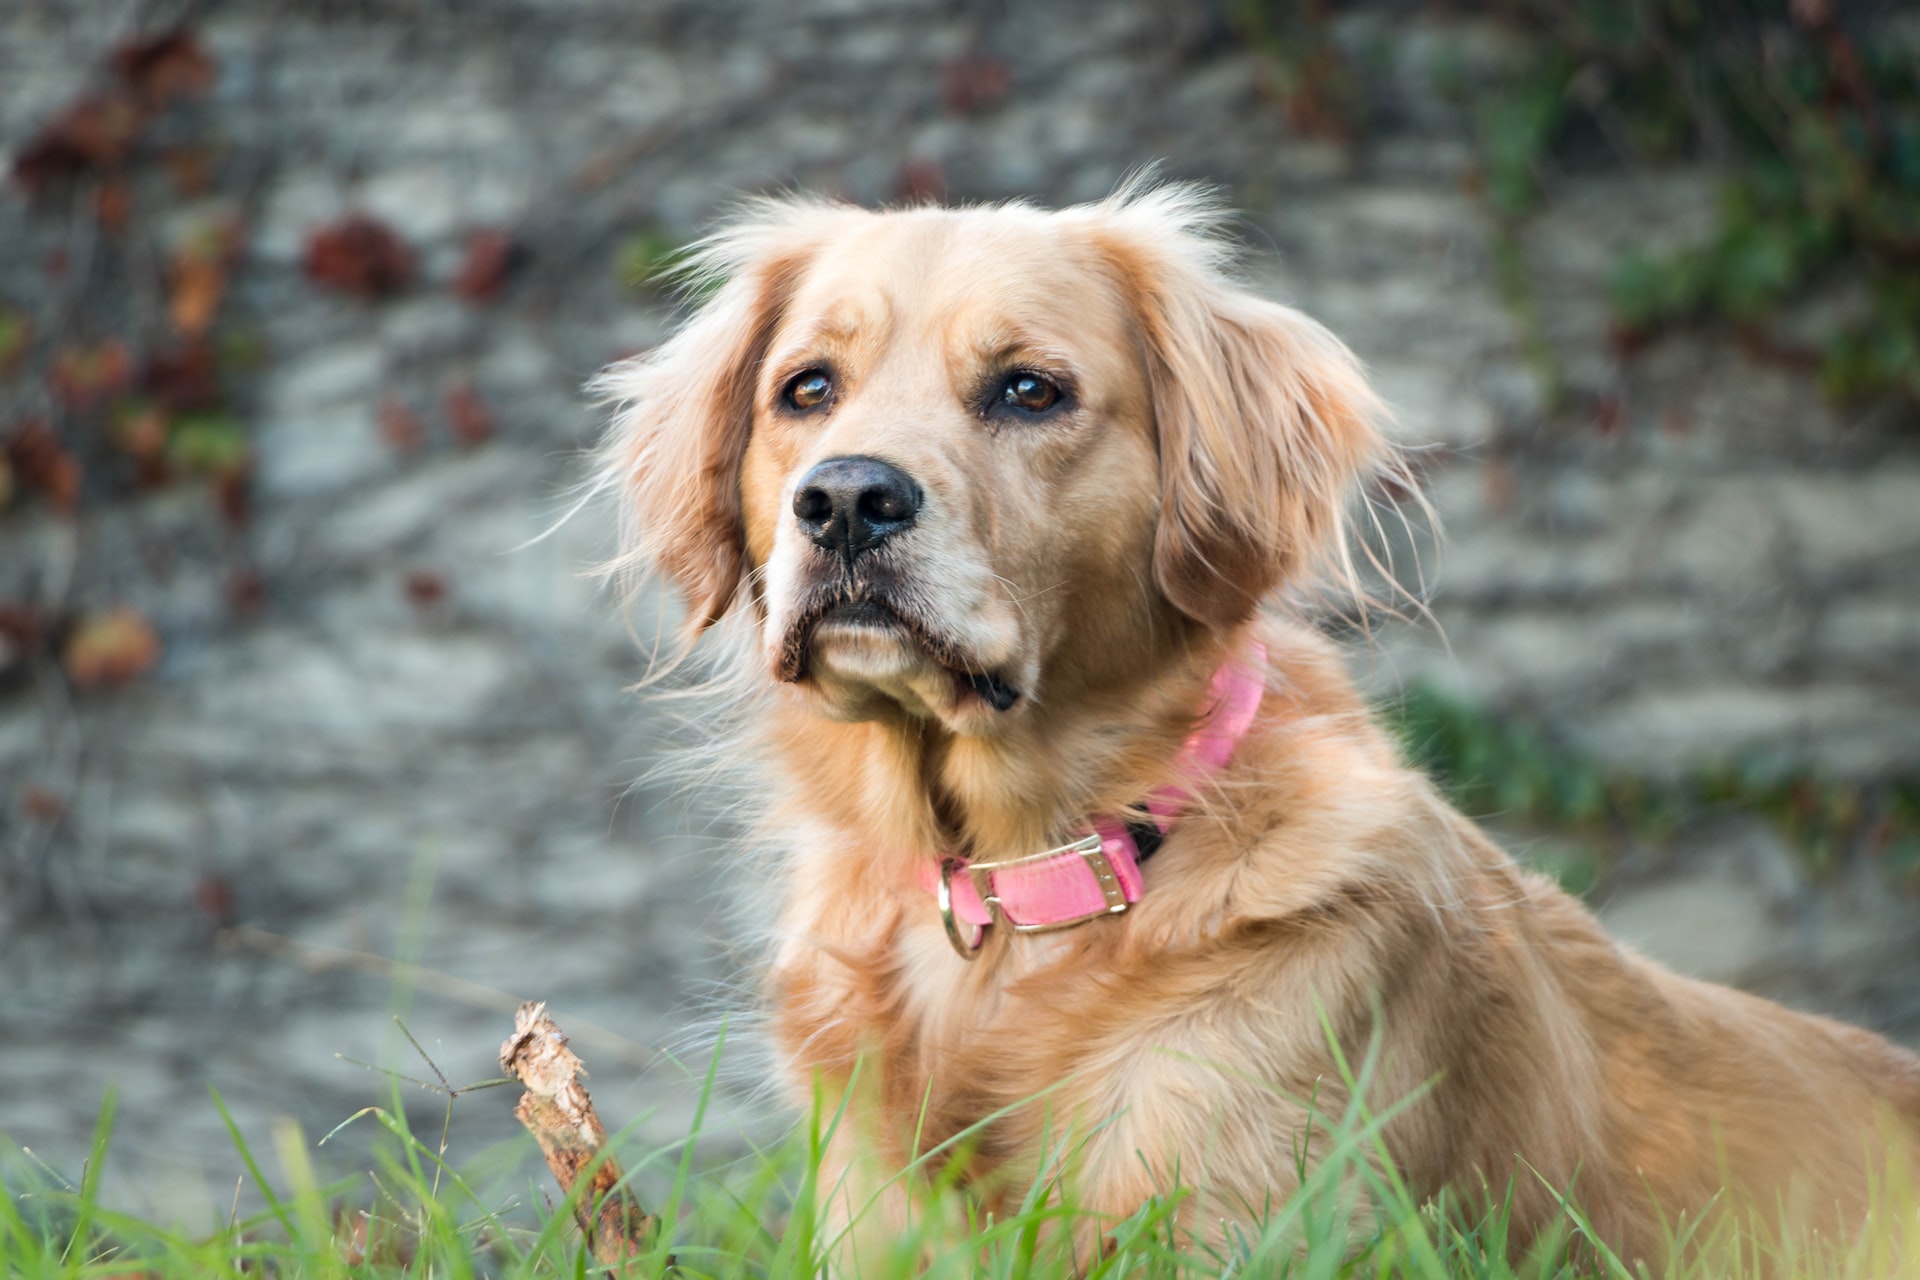 Golden Retriever playing in the grass. Image by Roberto Lopez from Unsplash.